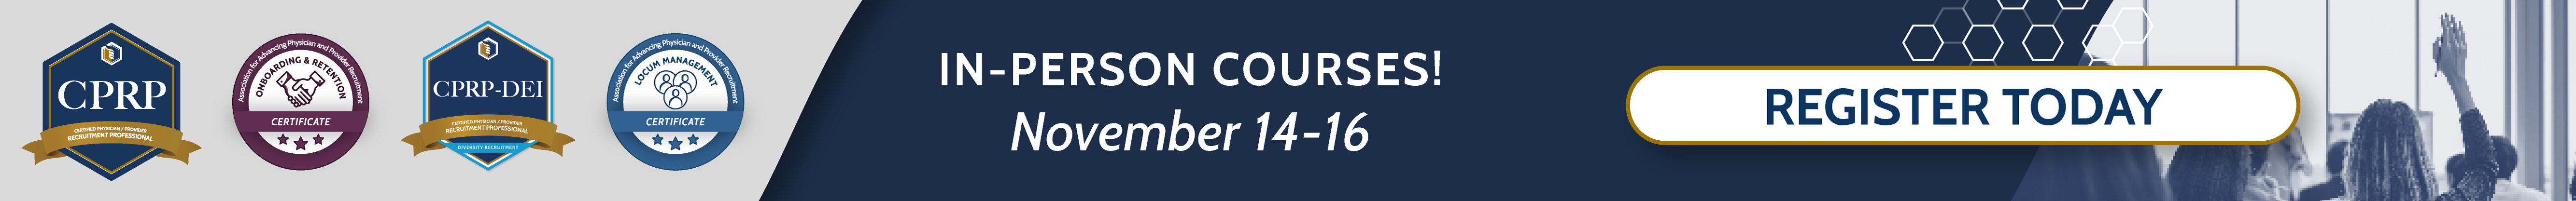 November In-Person Courses